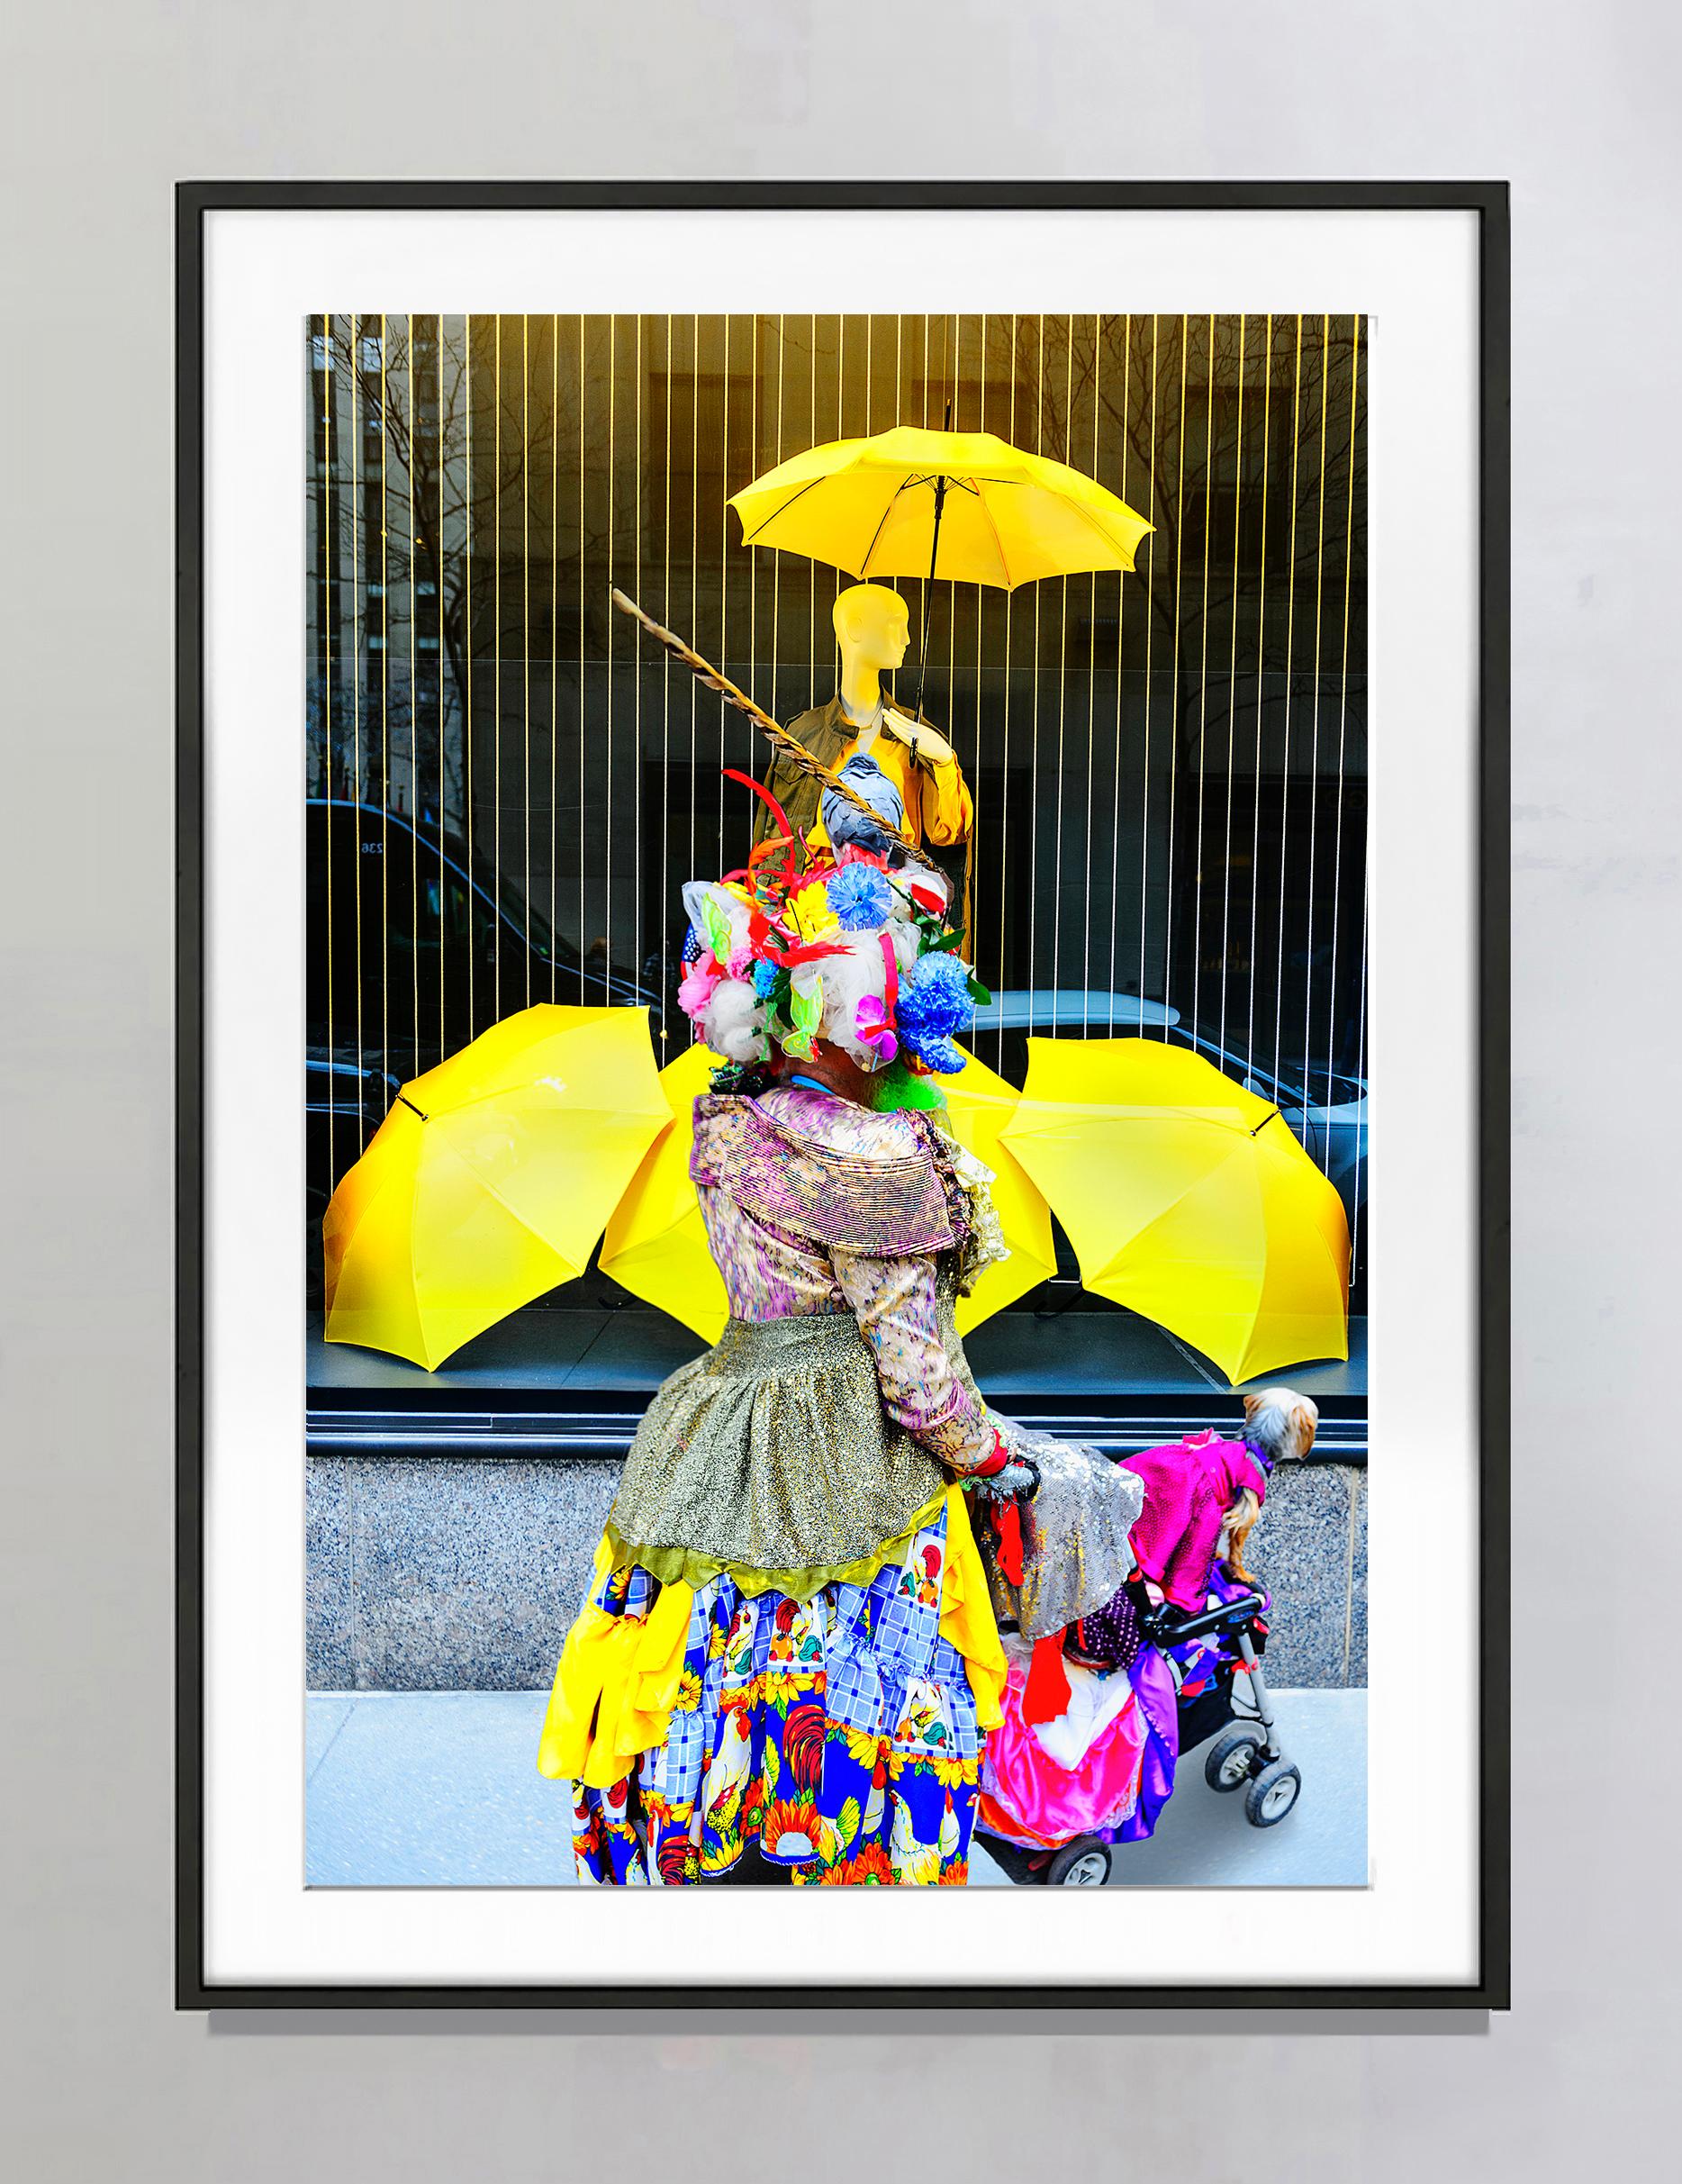 Street photograph of an eccentric woman with a brightly colored hat and colorful clothes pushing a baby carriage with a dog occupant. She stands in front of a window display with bright yellow umbrellas. The interaction between the colors of the